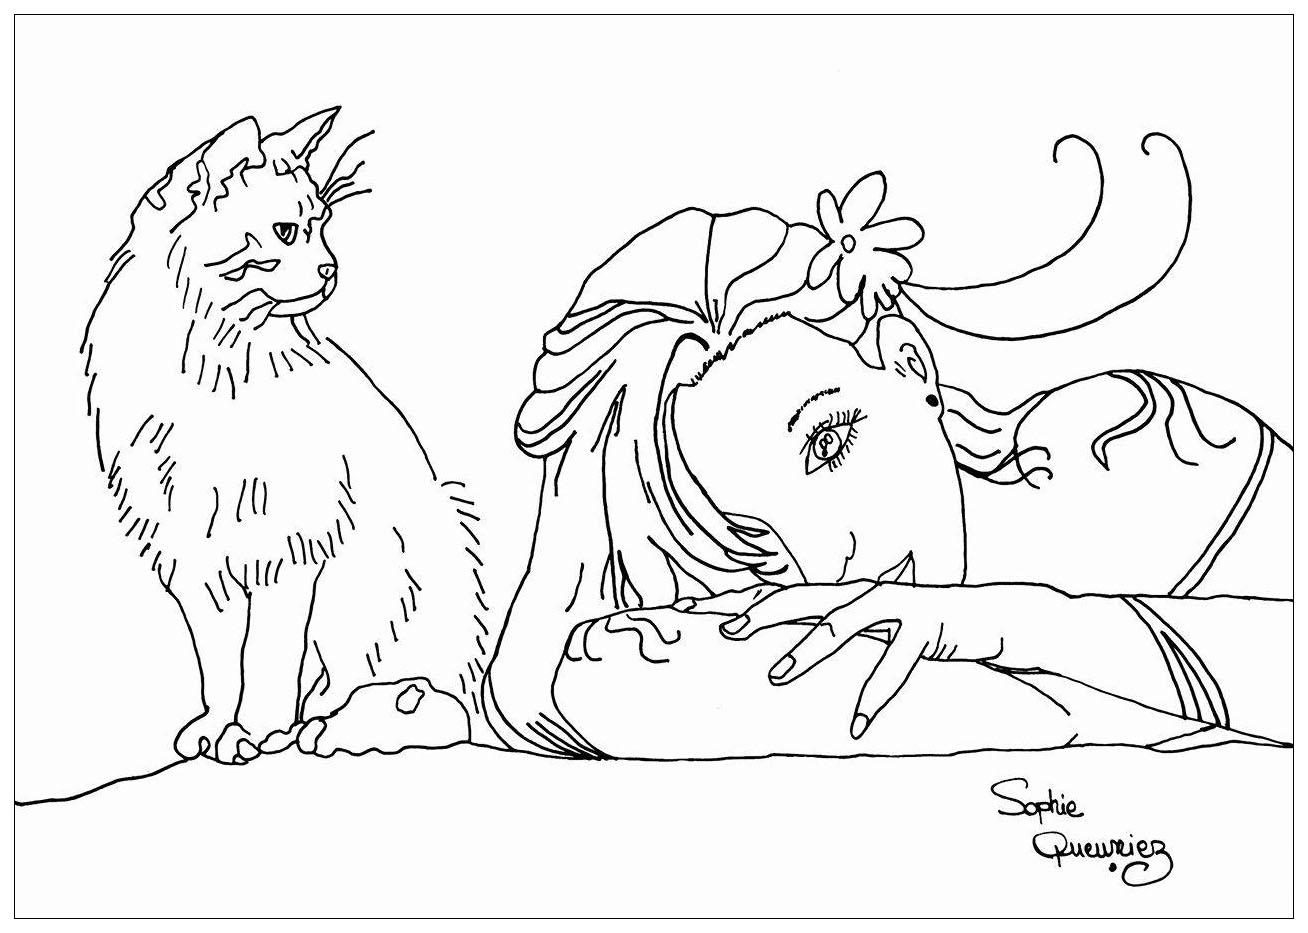 Color this beautiful cat coloring page with your favorite colors